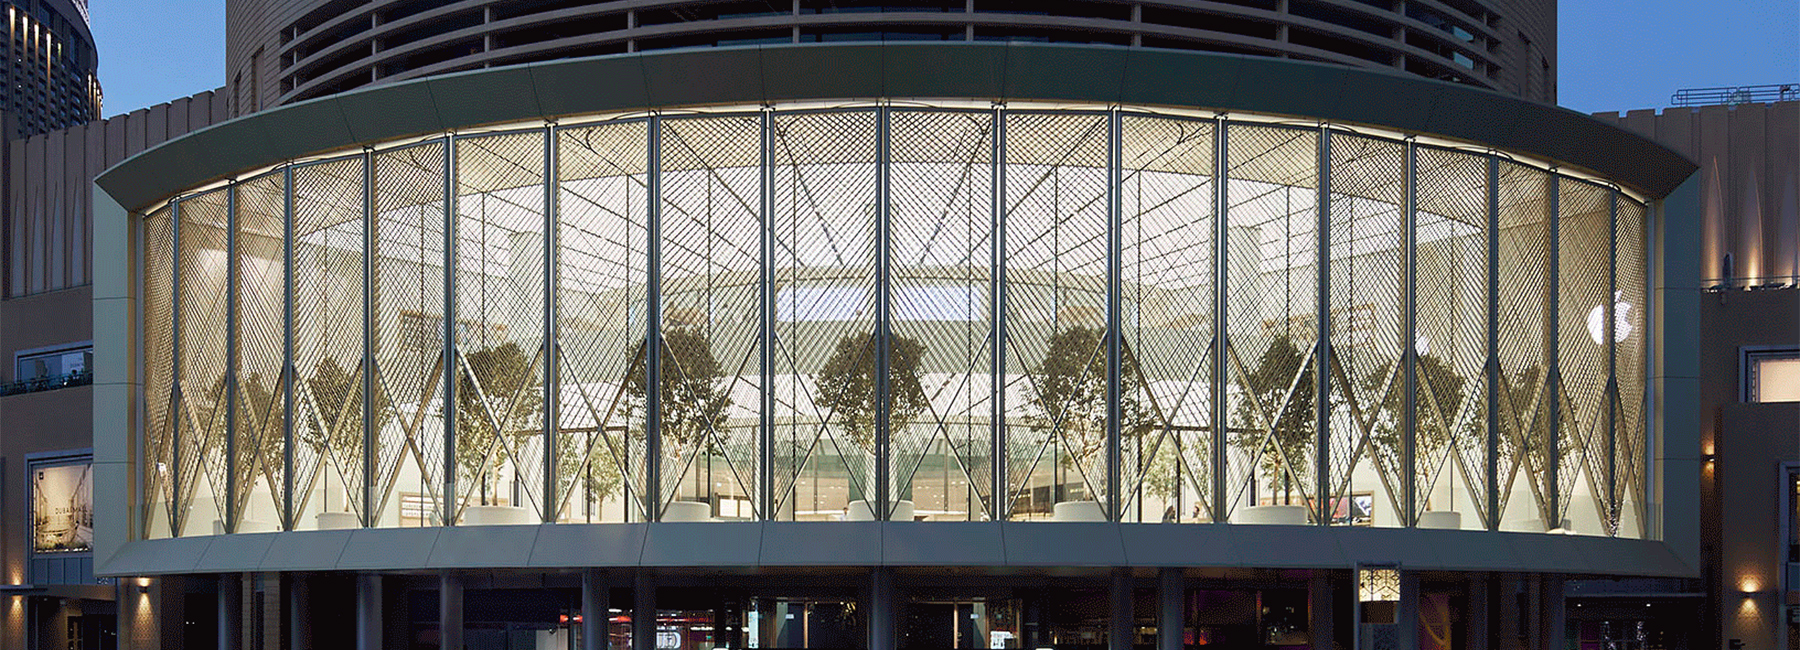 apple dubai mall by foster + partners features giant 'solar wings' art installation